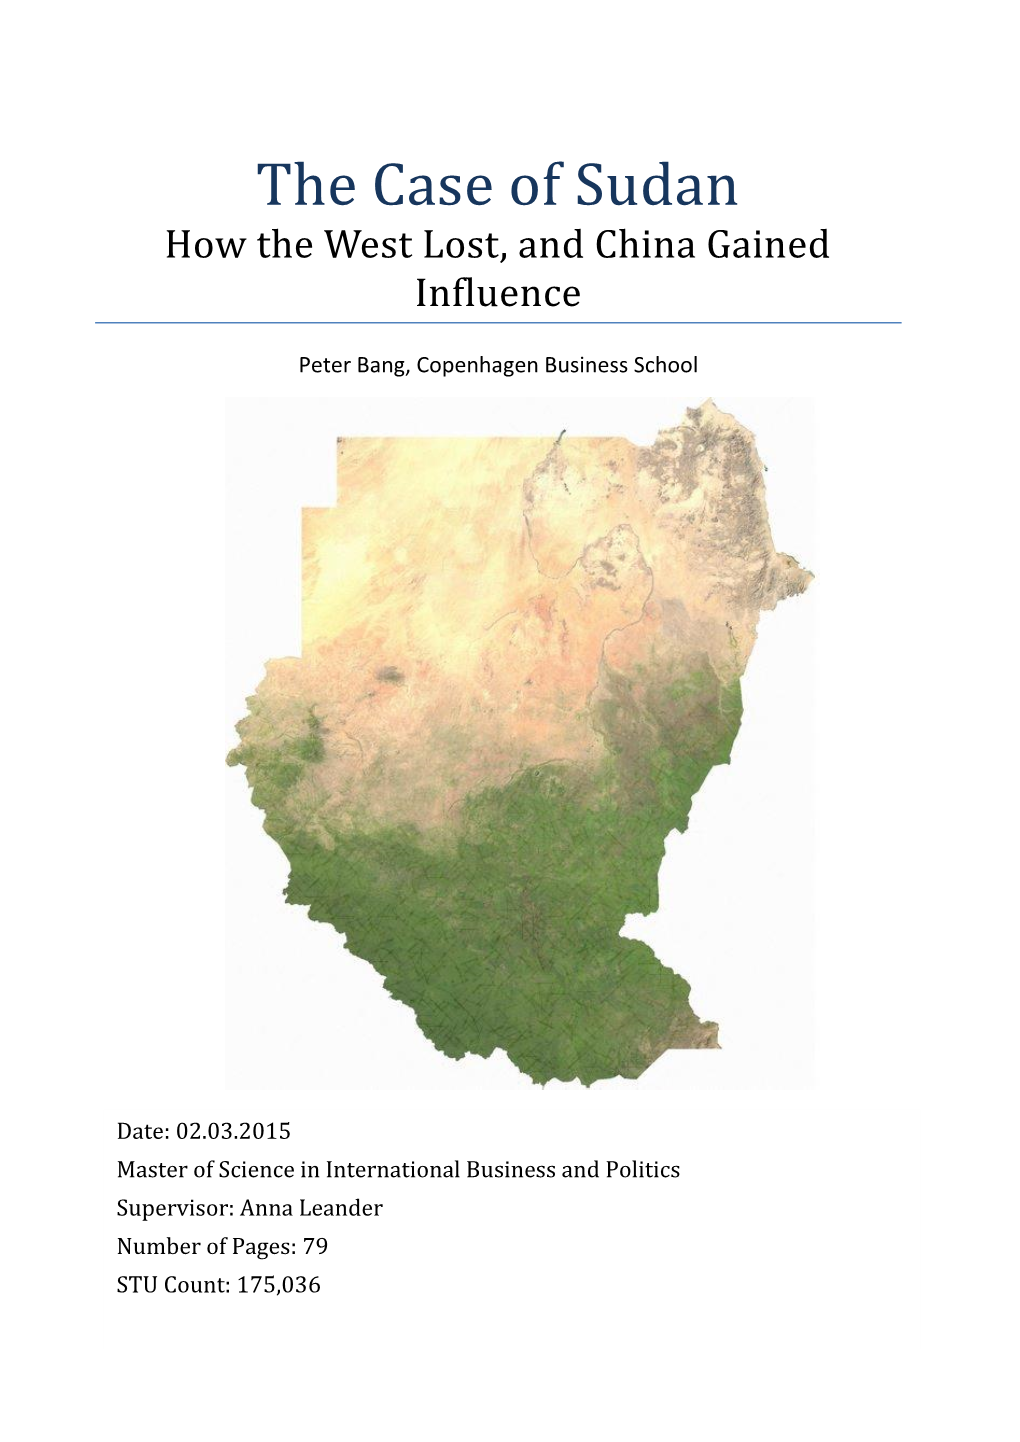 The Case of Sudan How the West Lost, and China Gained Influence